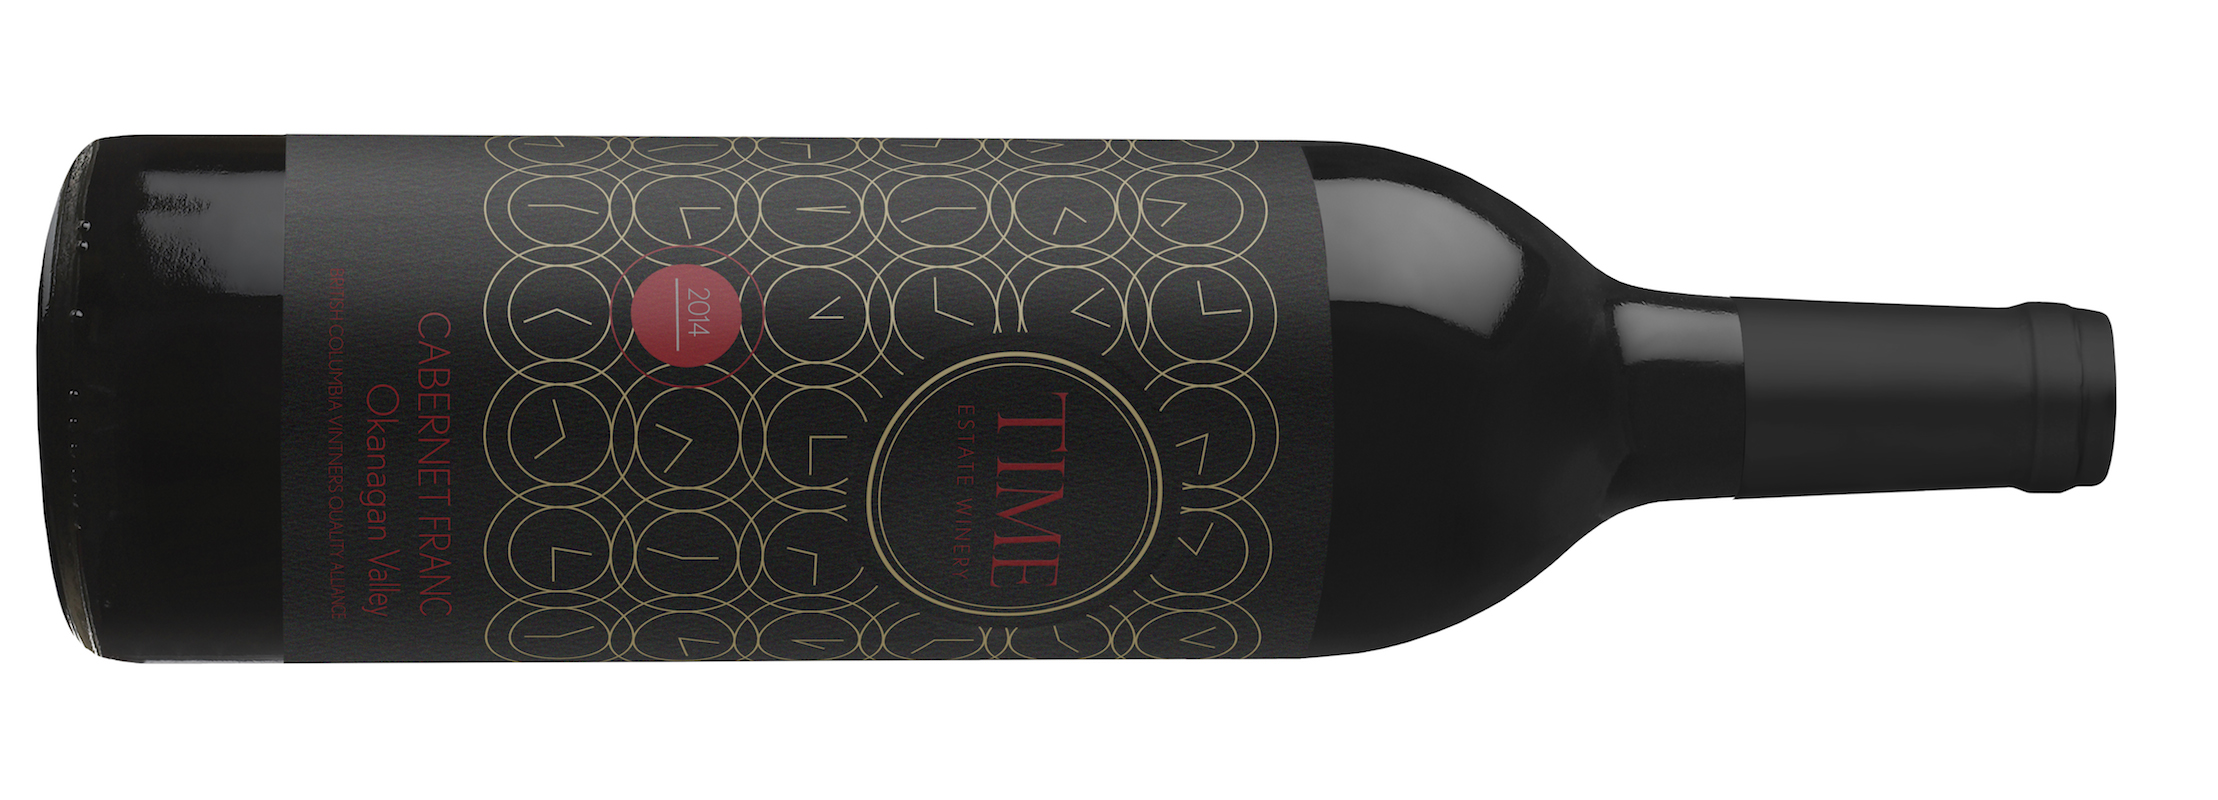 TIME-CabFranc-2014